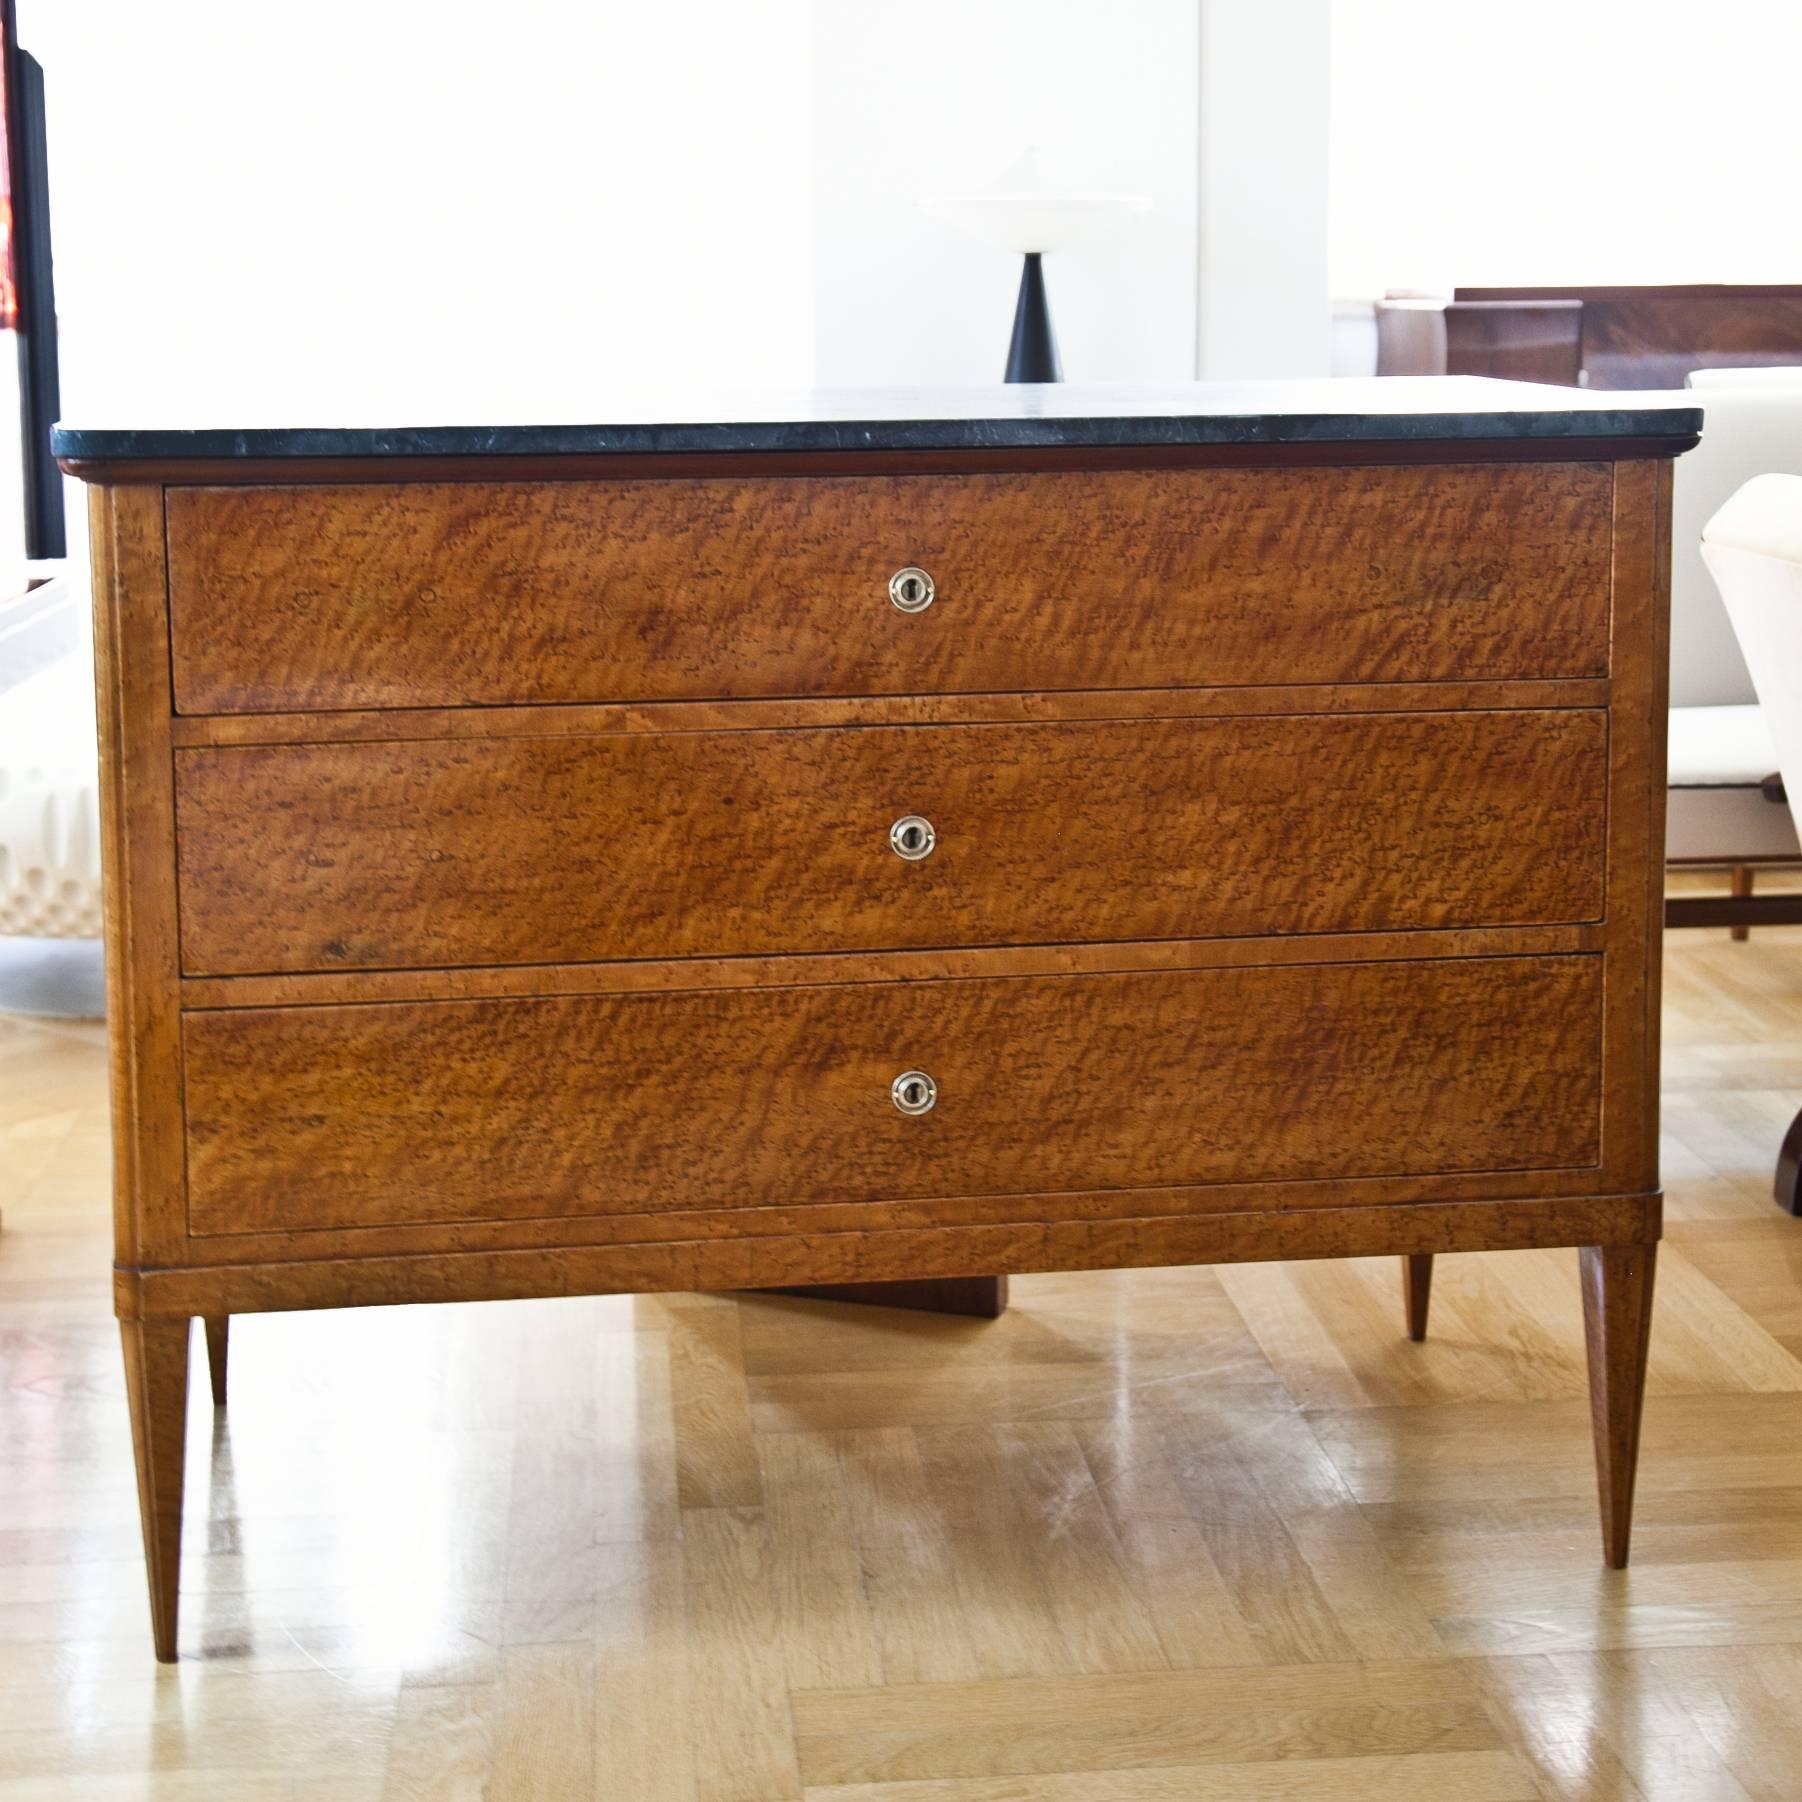 Italian three-drawered chest on tapered legs, with a very beautiful bird's-eye maple veneer. The marmor top was added later.